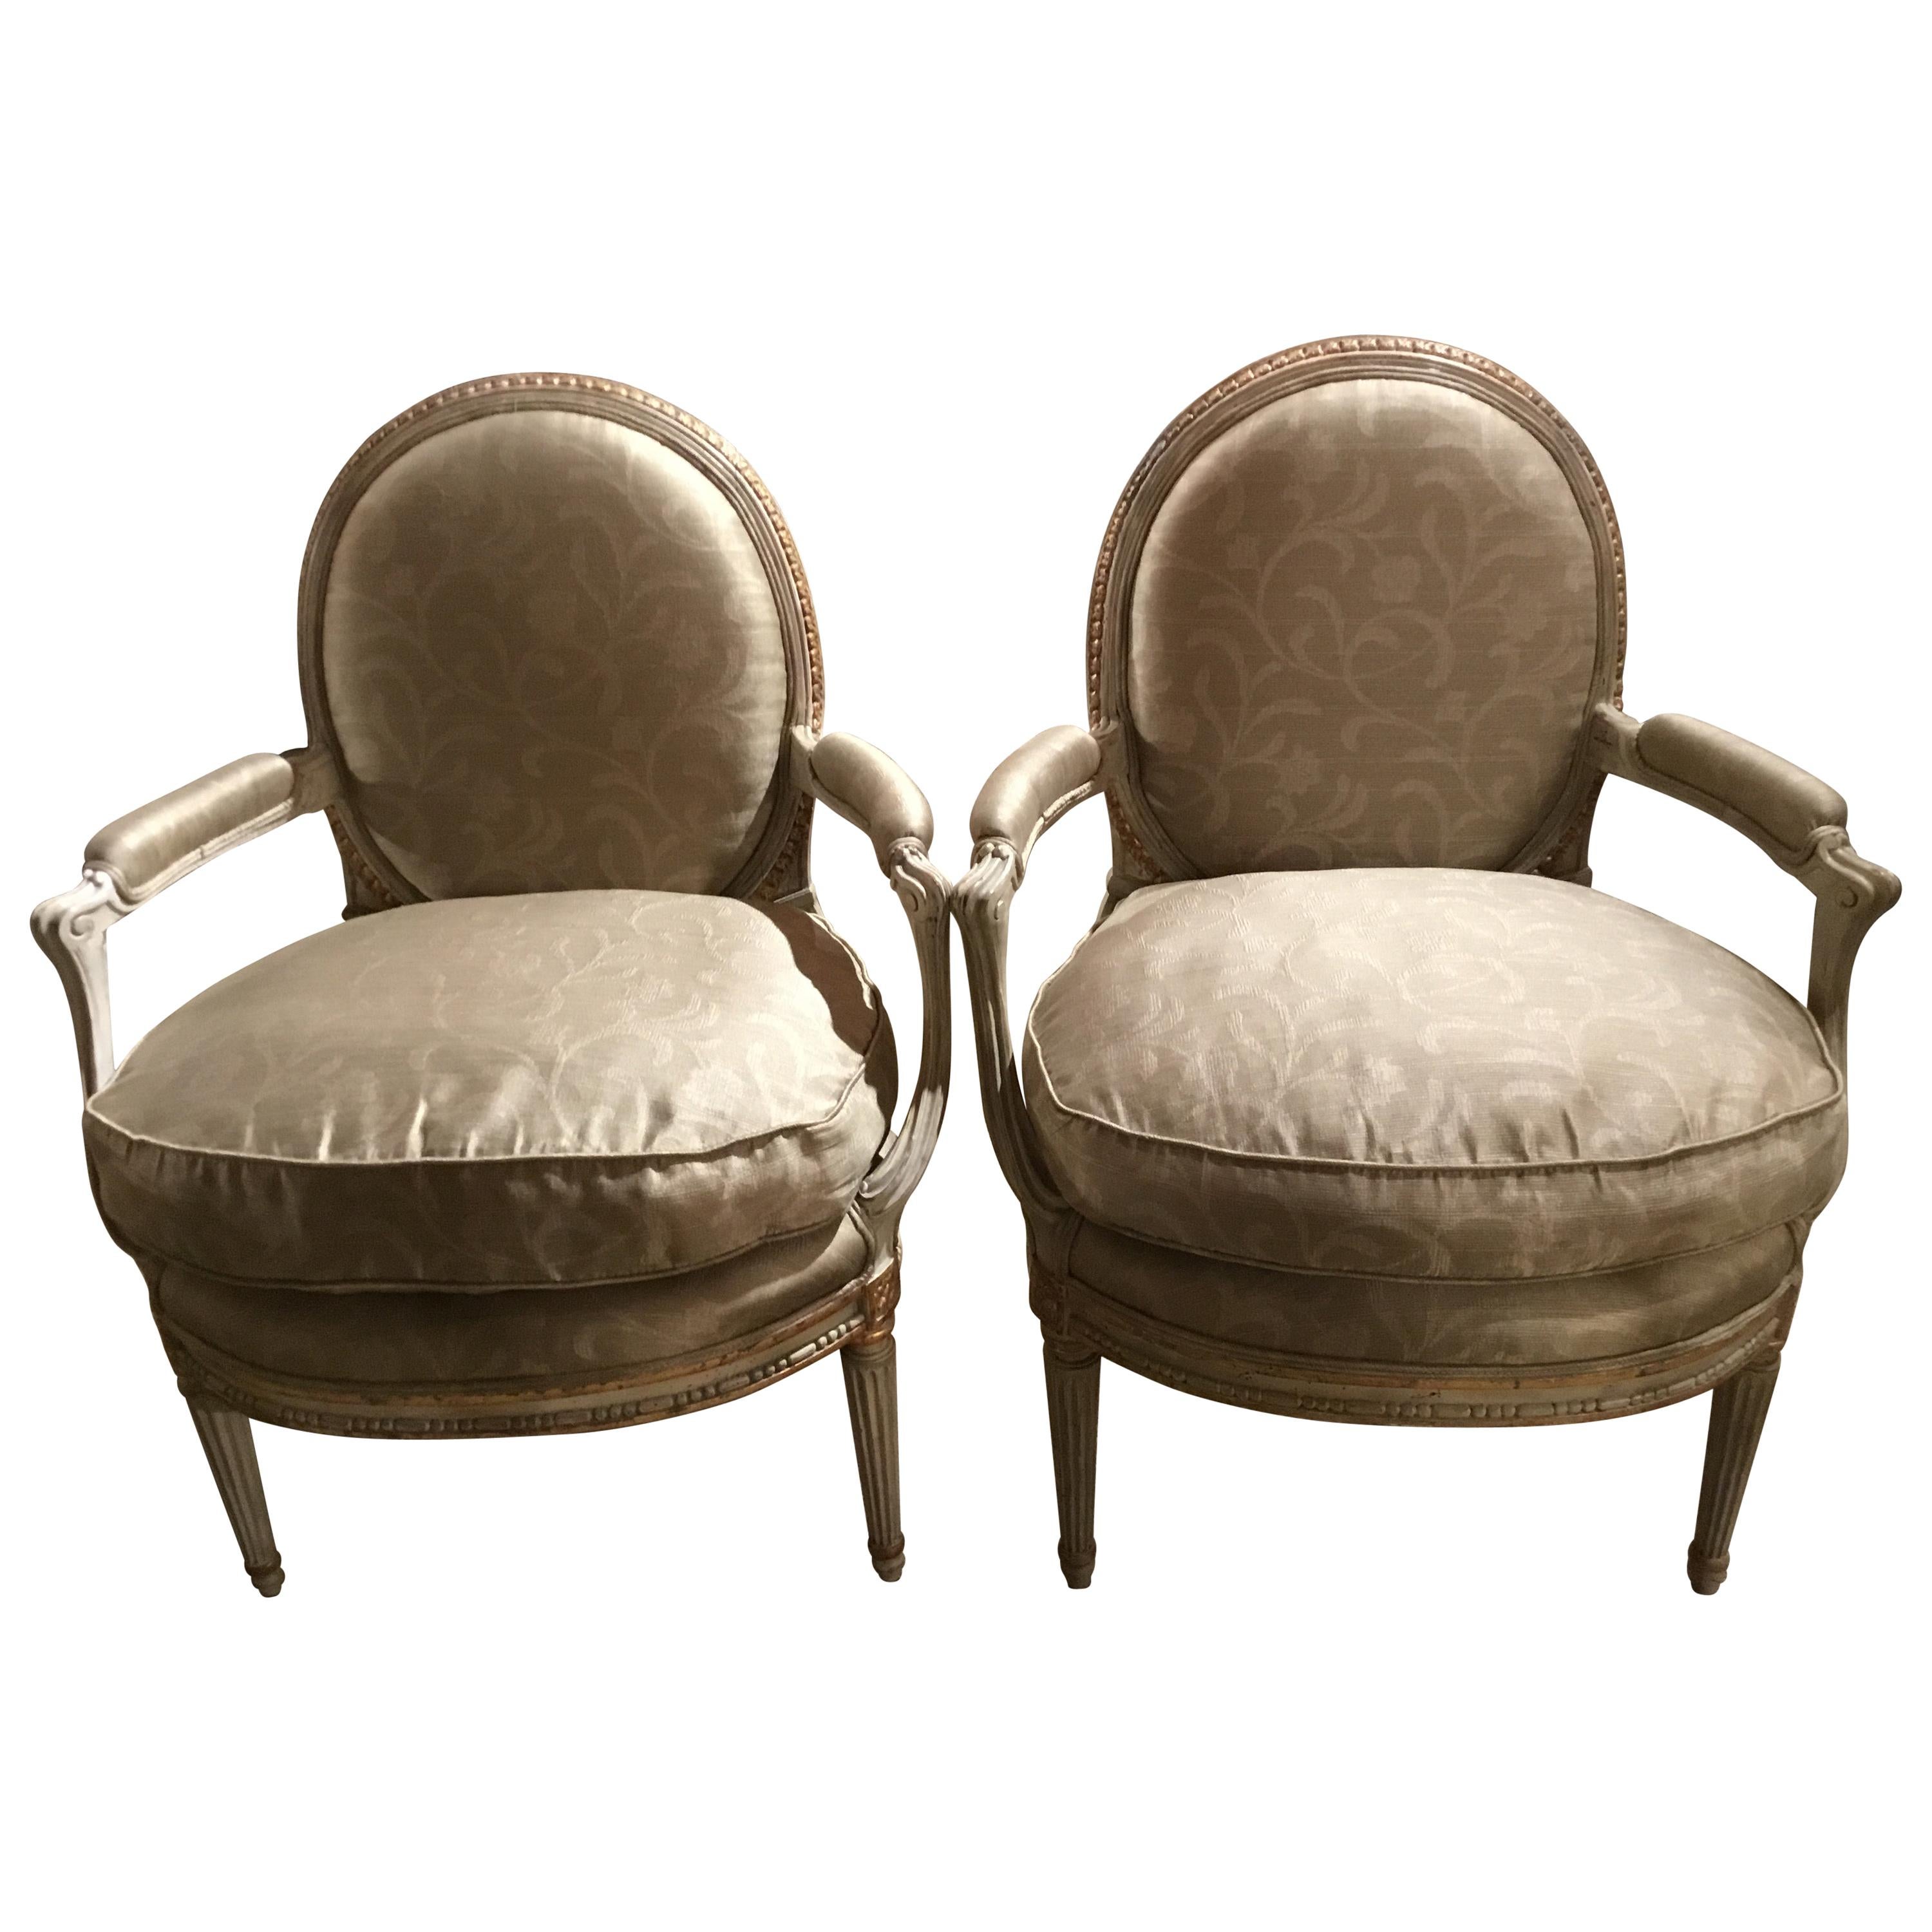 Pair of French Louis XVI Style Parcel Paint and Parcel-Gilt Chairs/Fauteuils